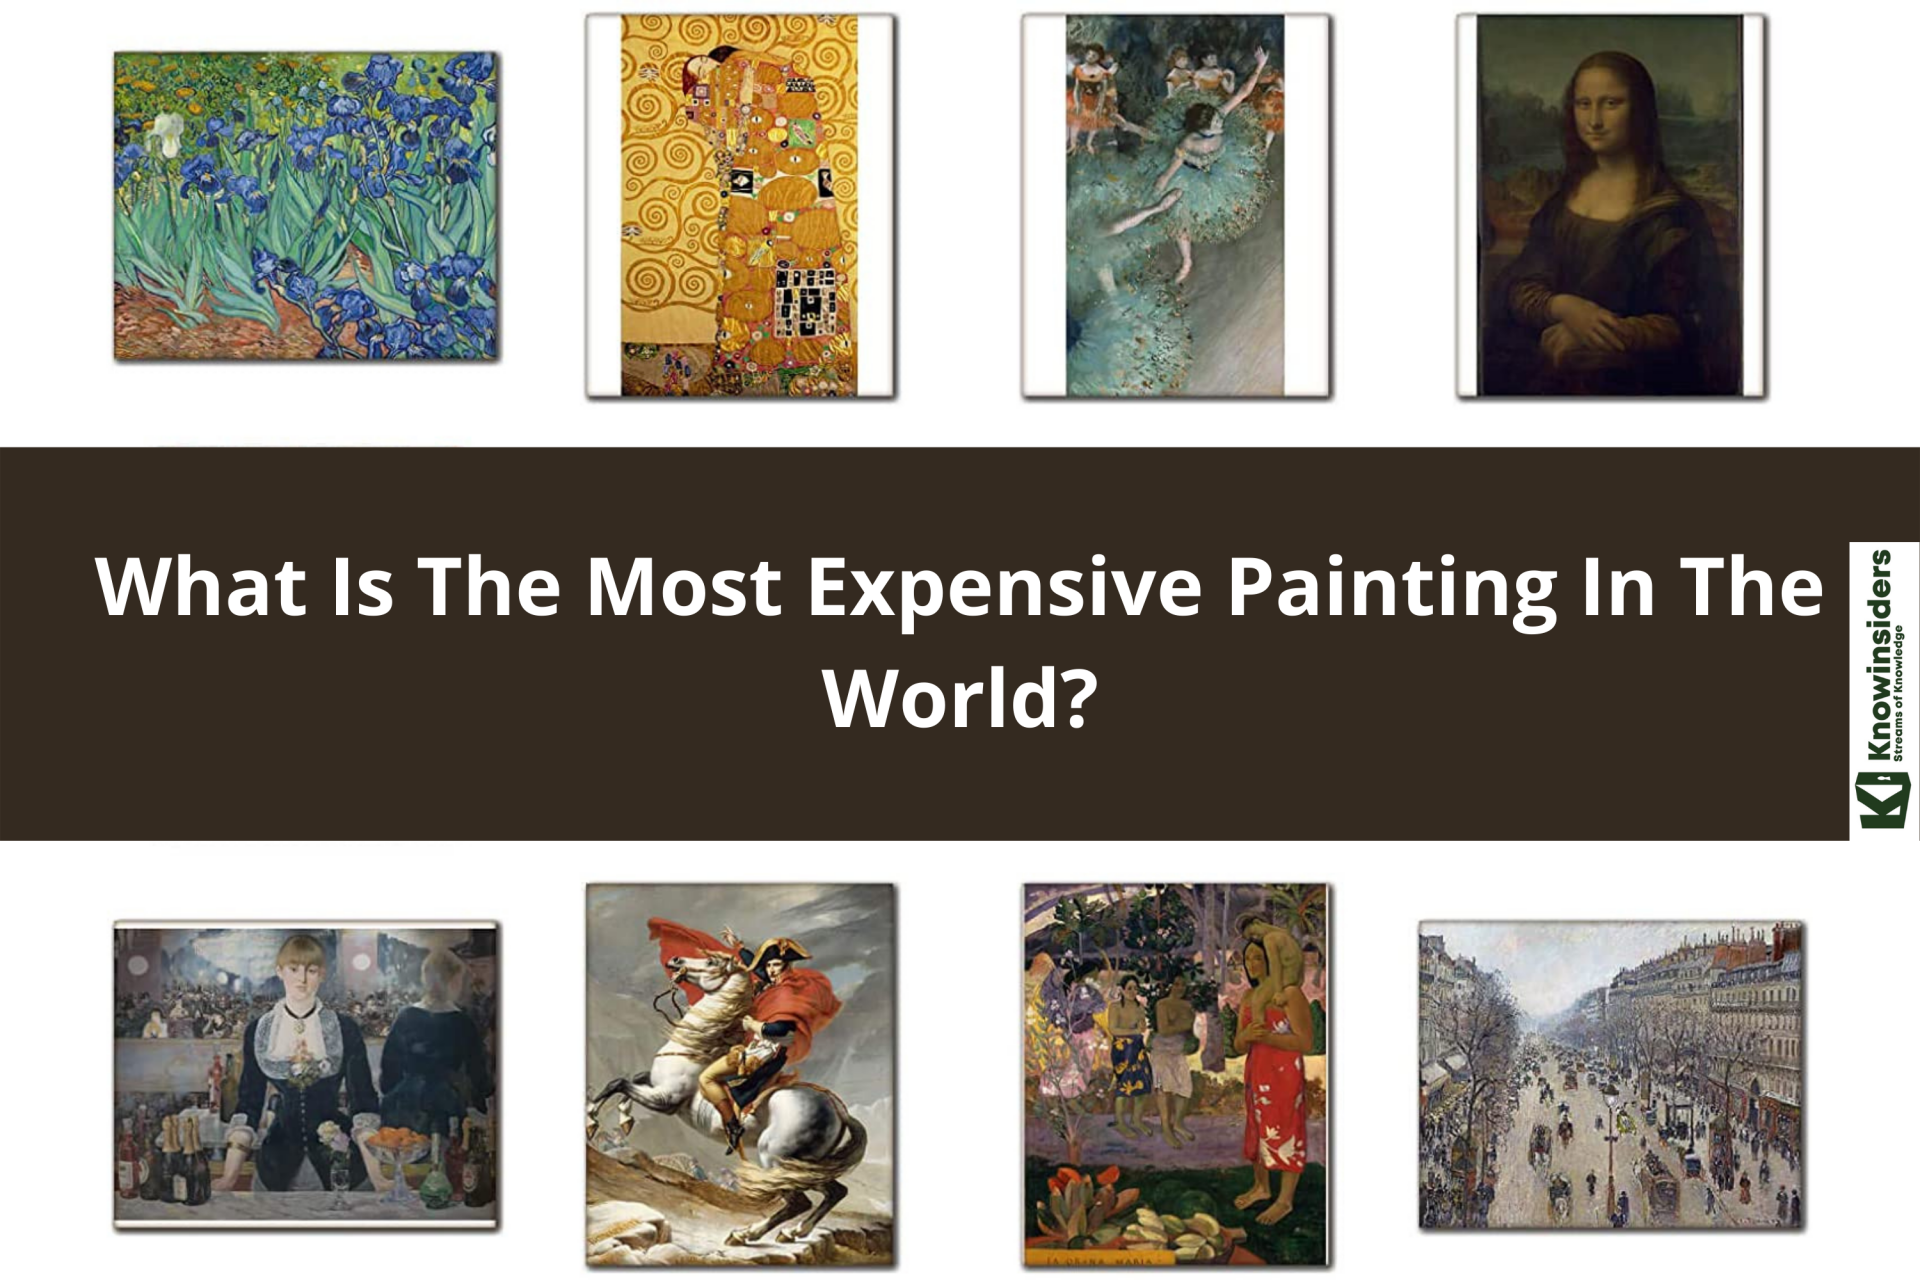 What Is The Most Expensive Painting In The World?